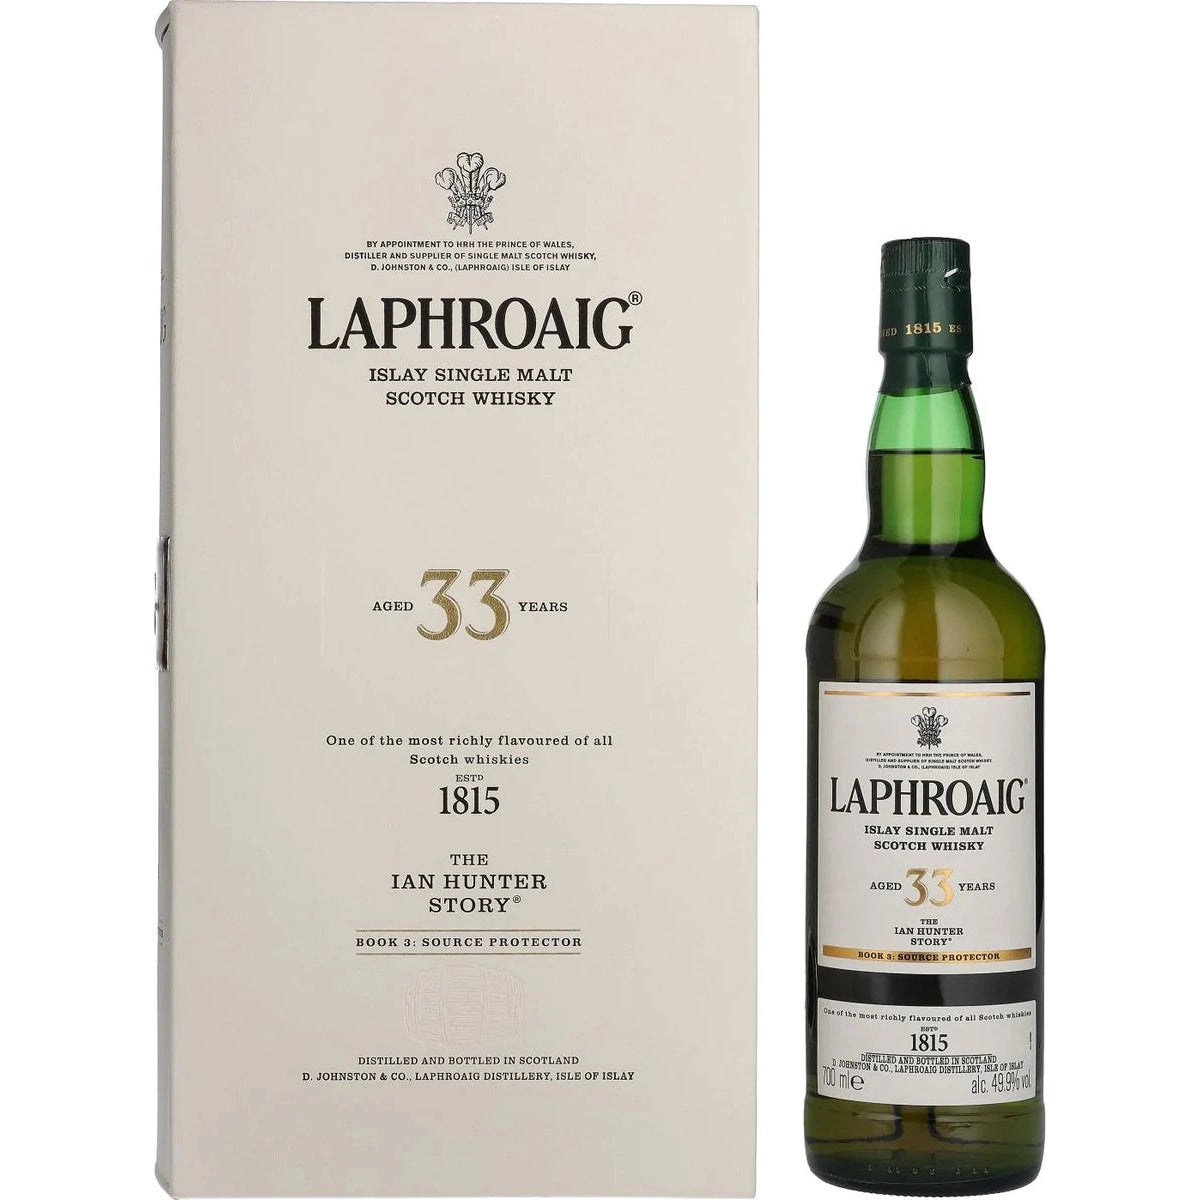 Laphroaig 33 Years Old The Ian Hunter Story Book 3: Source Protector Limited Edition 49,9% Vol. 0,7l in Giftbox